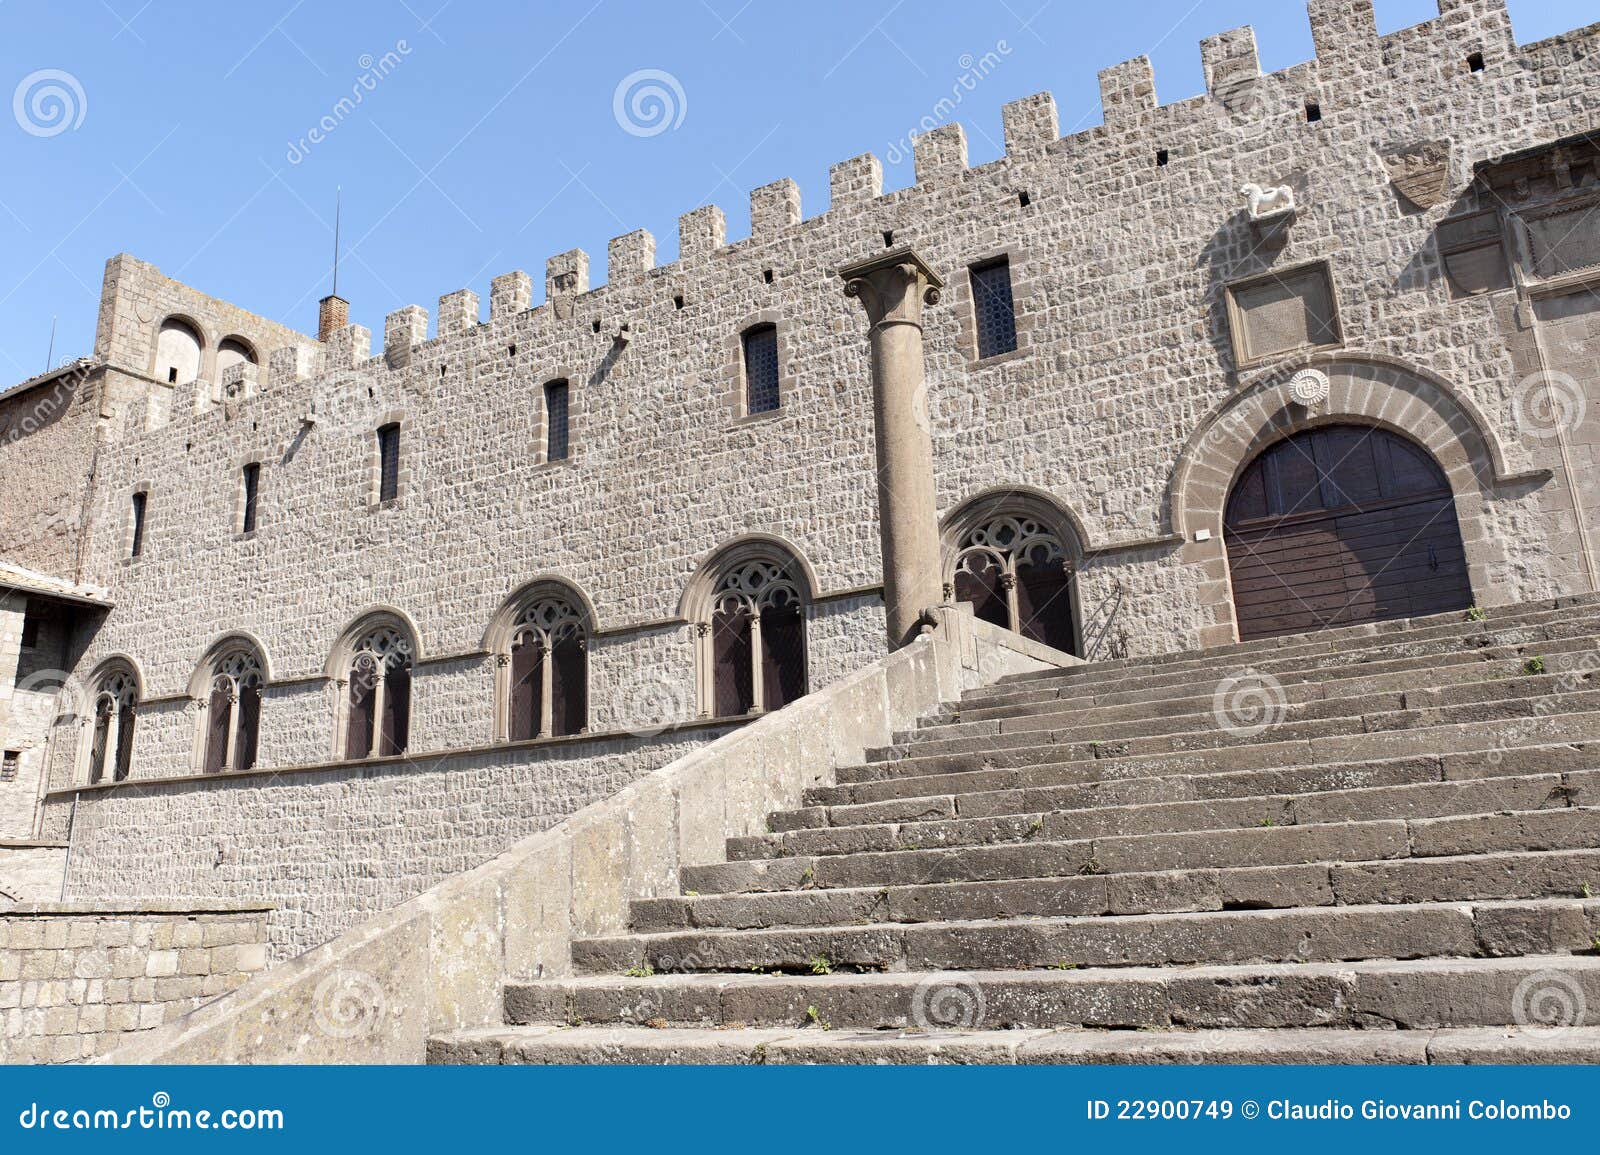 viterbo, palace of the popes